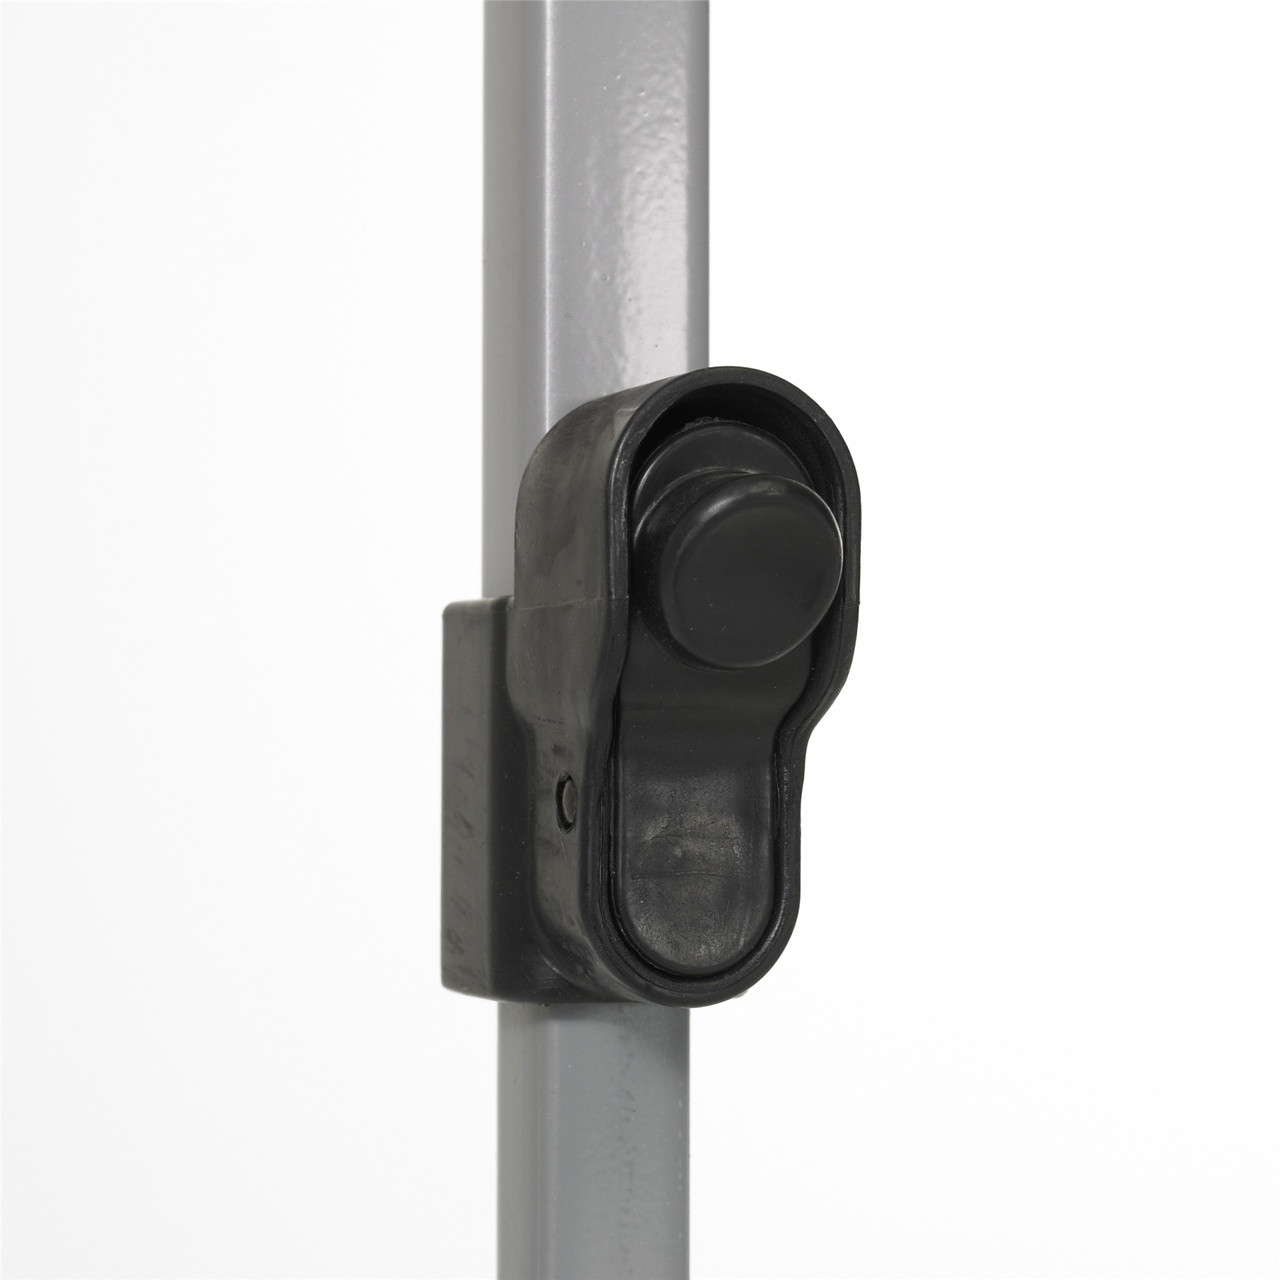 Close up view of the adjustable height latch on the Wenzel Smartshade Screen House